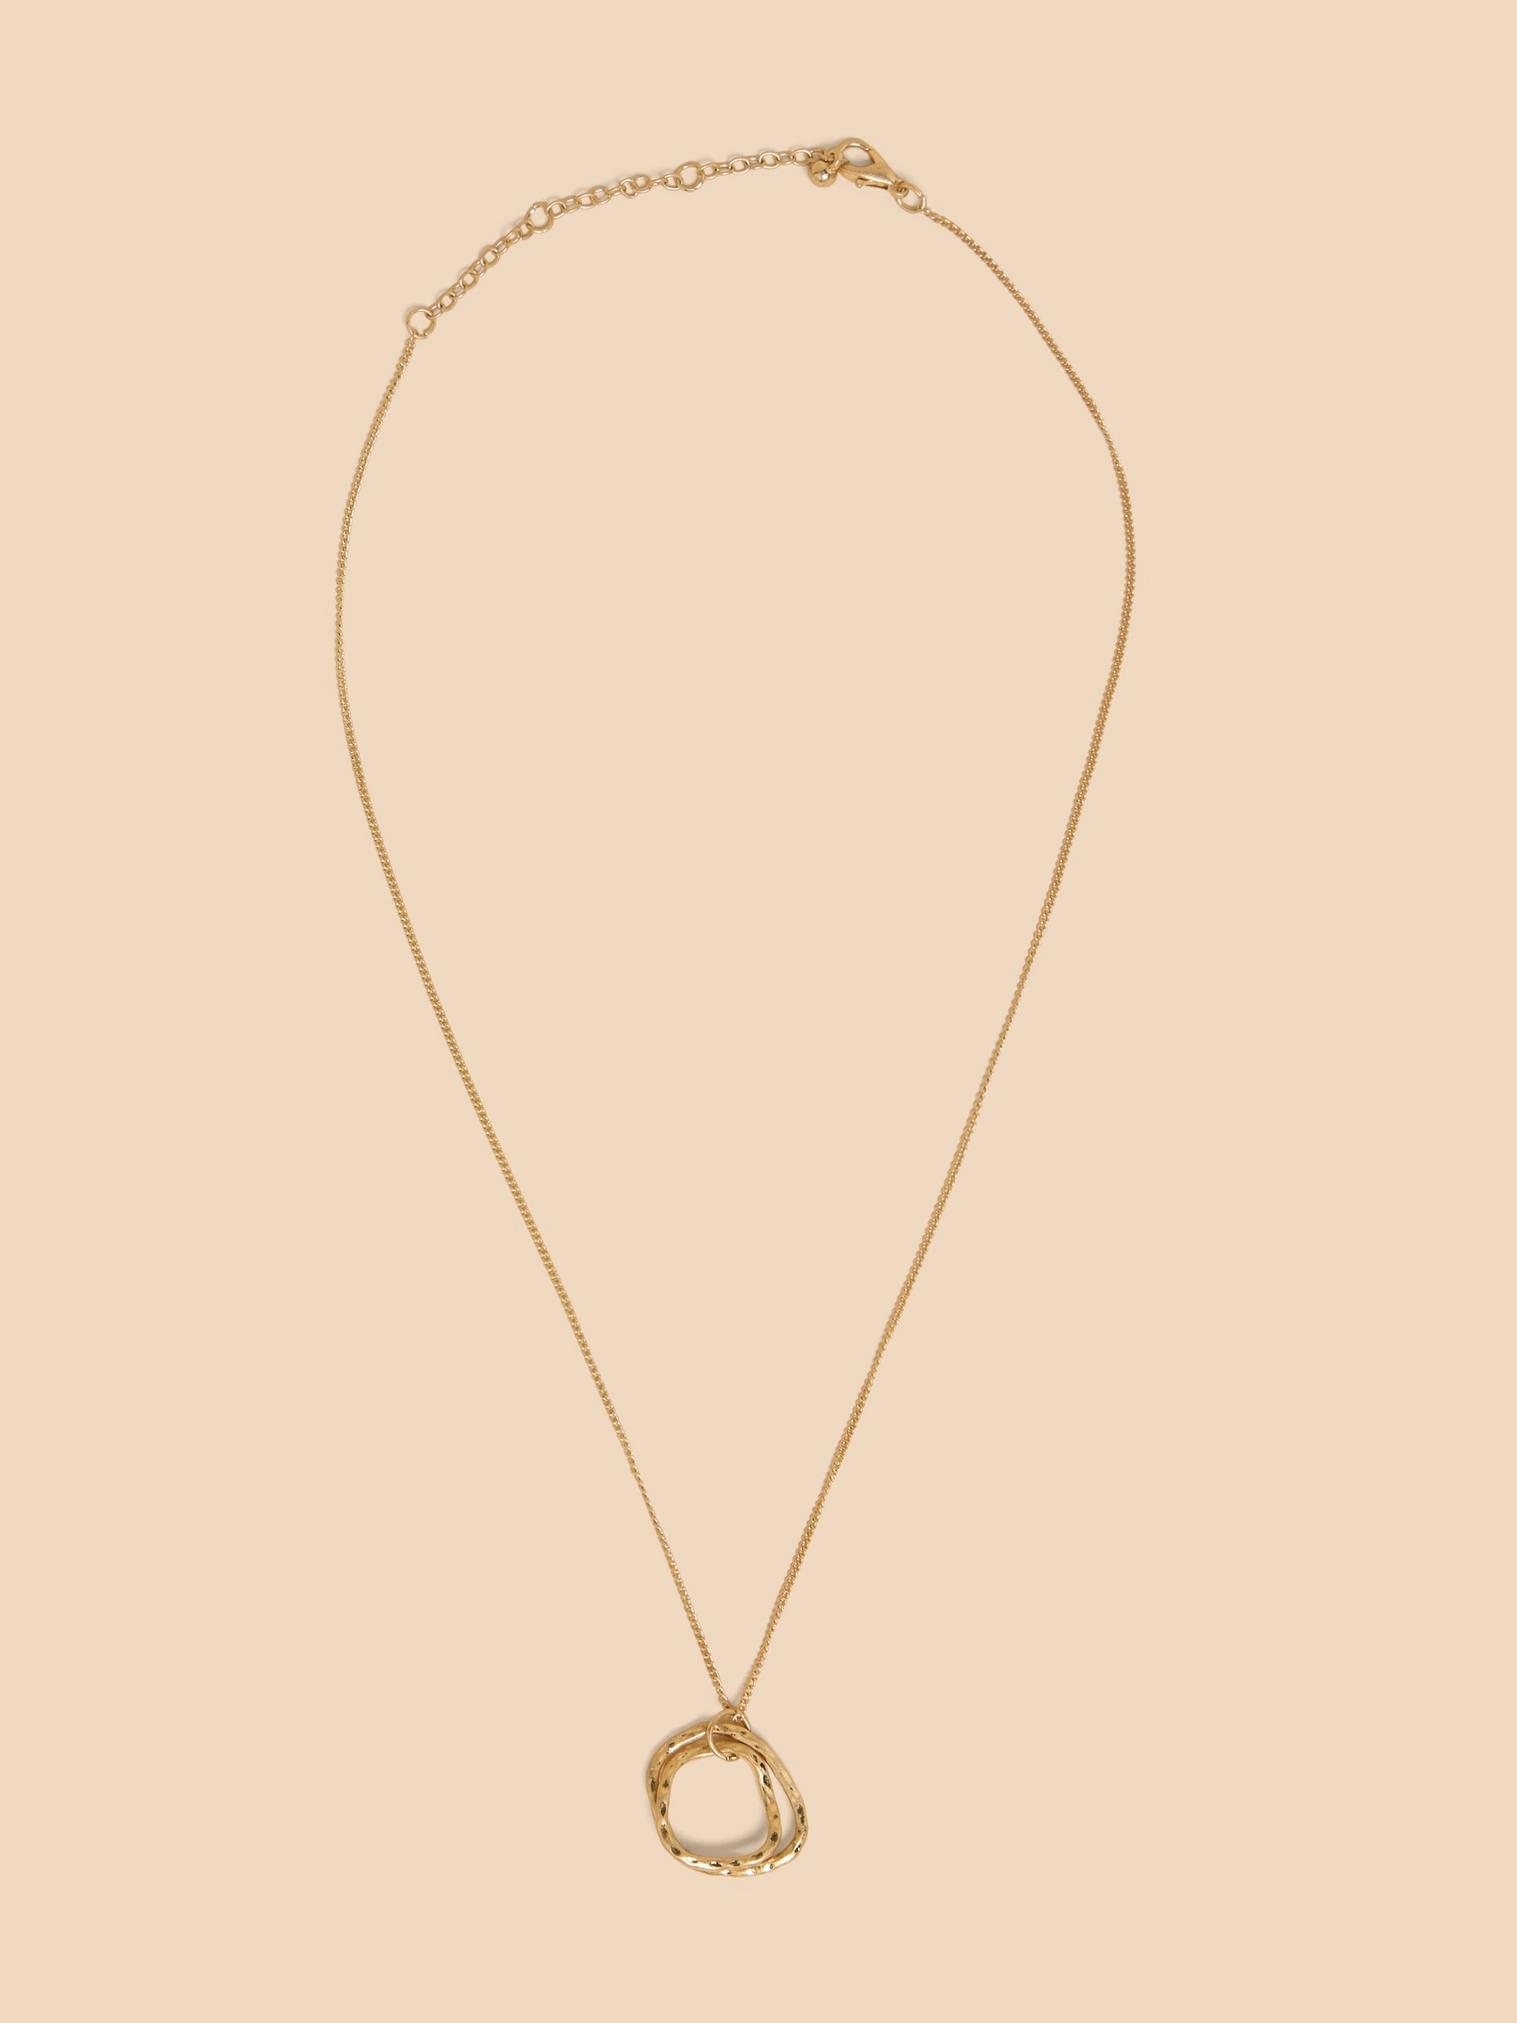 Oval Pendant Necklace in GLD TN MET - FLAT FRONT